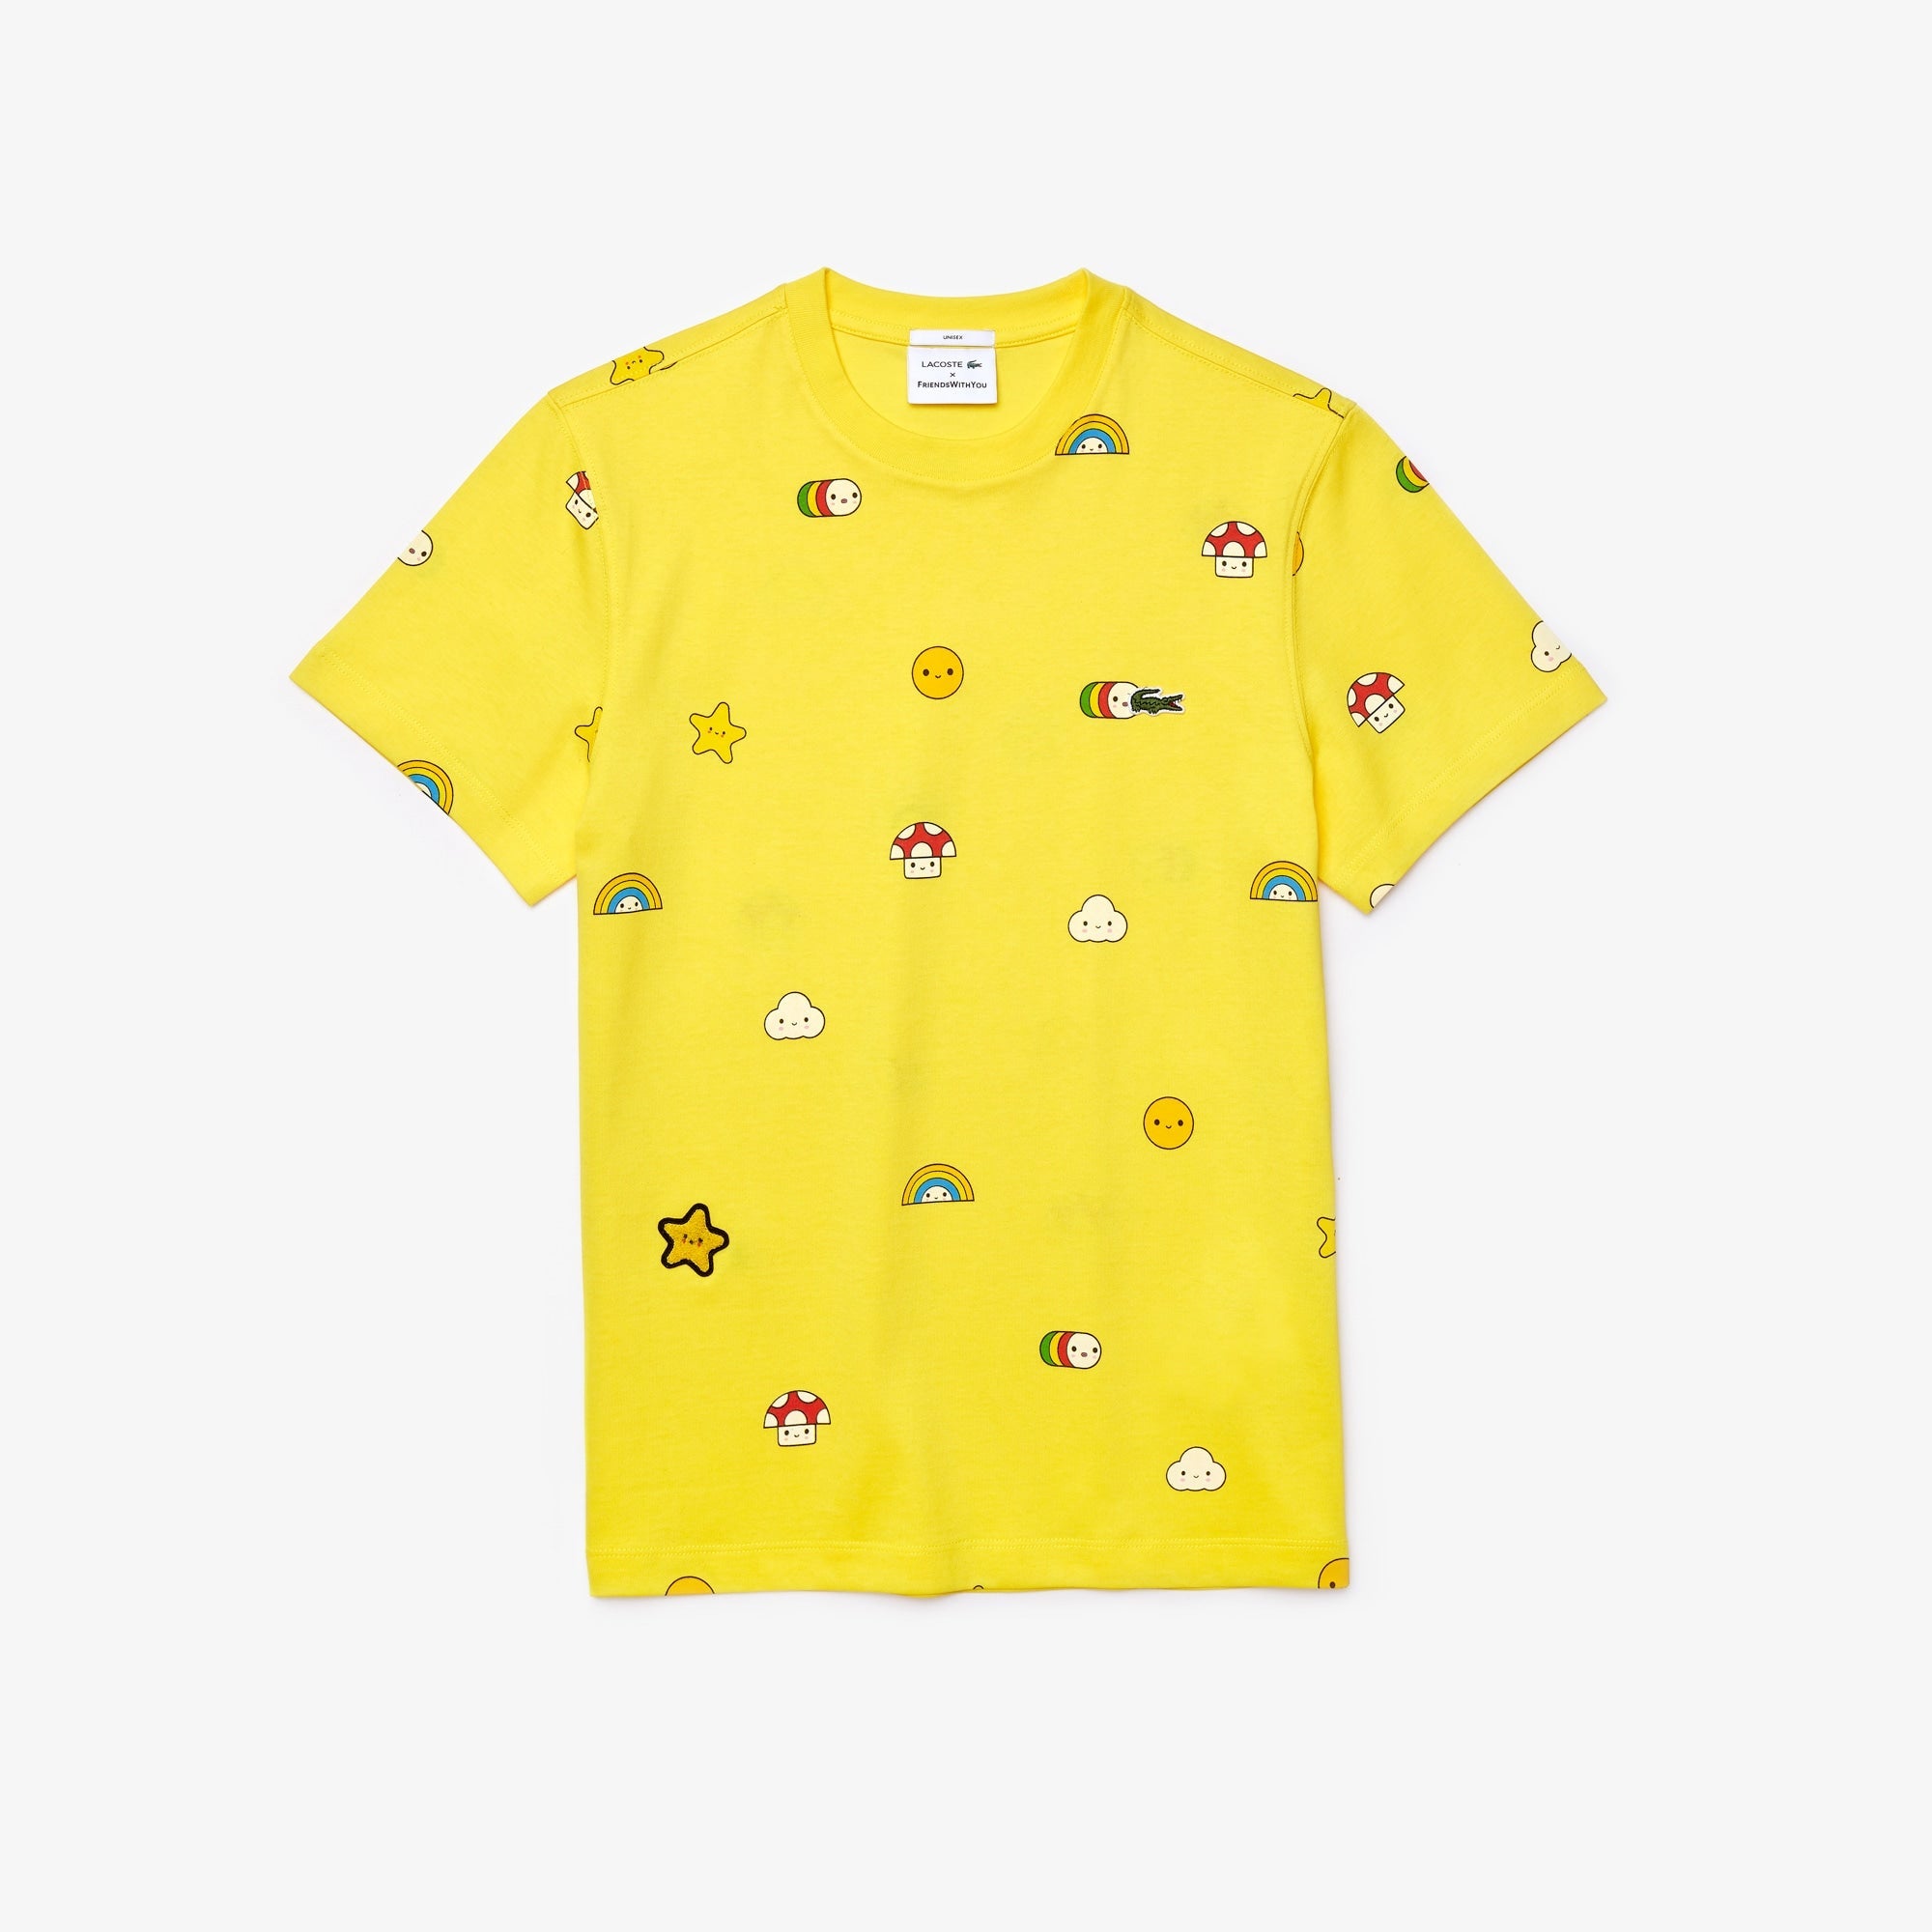 LACOSTE x FriendsWithYou Limited-Edition Graphic T-shirt Unisex Appare –  ASPHALT